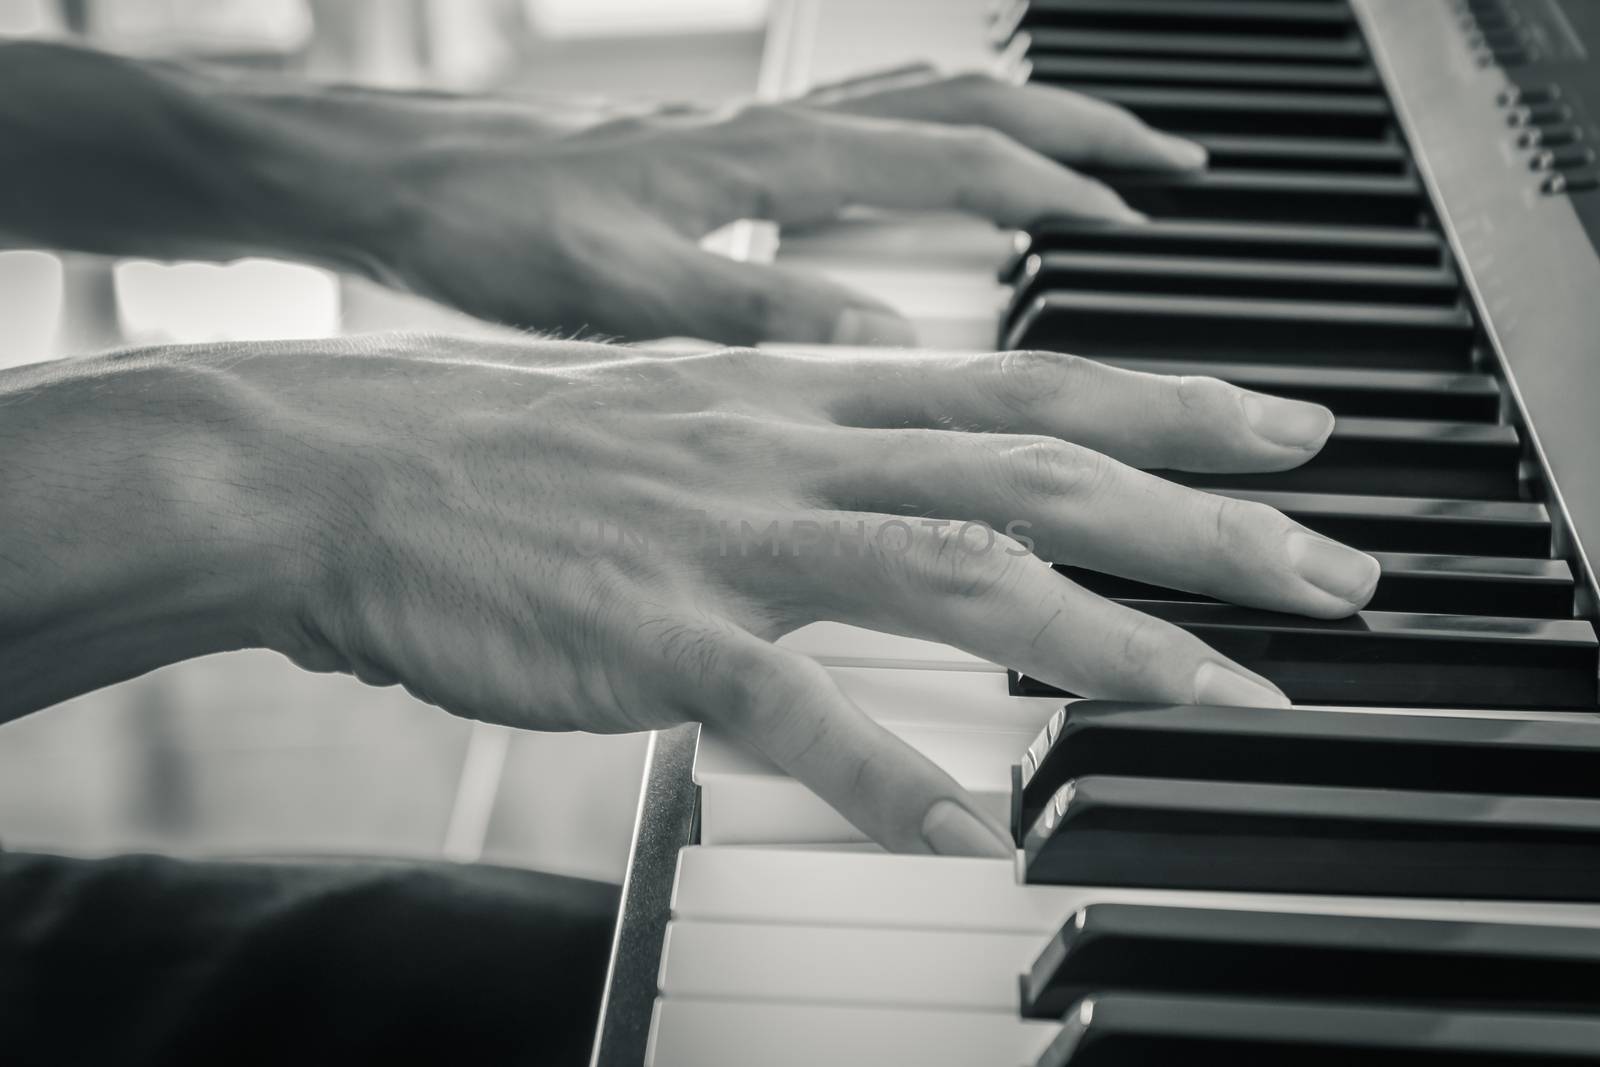 Hand of Piano Player on White Keys and Black Keys of Electric Piano in Zoom View